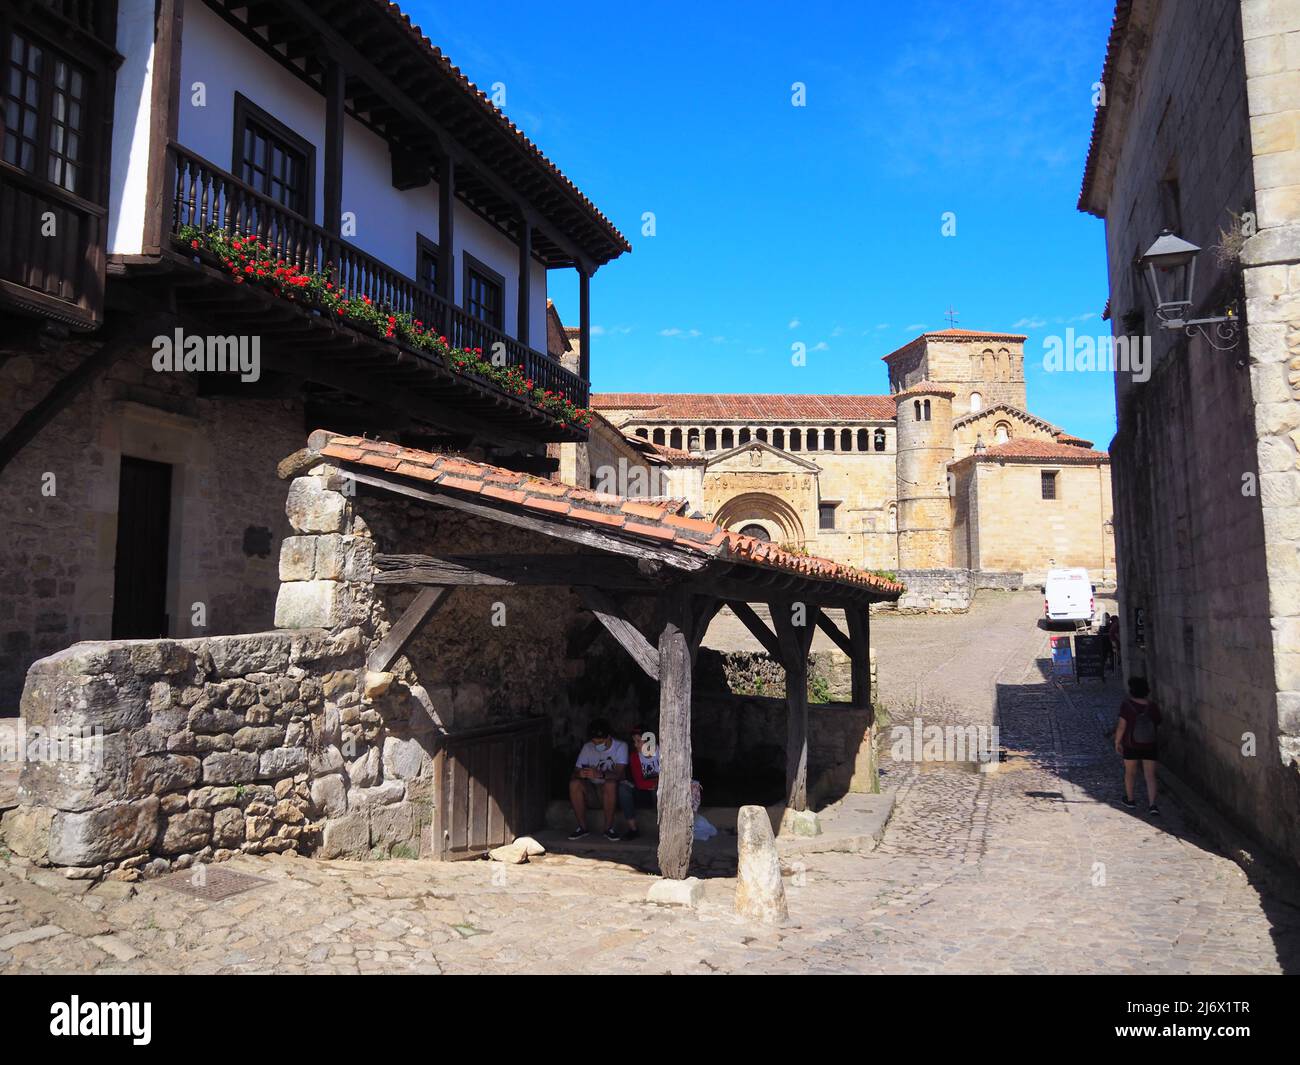 Santillana del Mar, Cantabrian municipality with a beautiful old town. Spain. Stock Photo